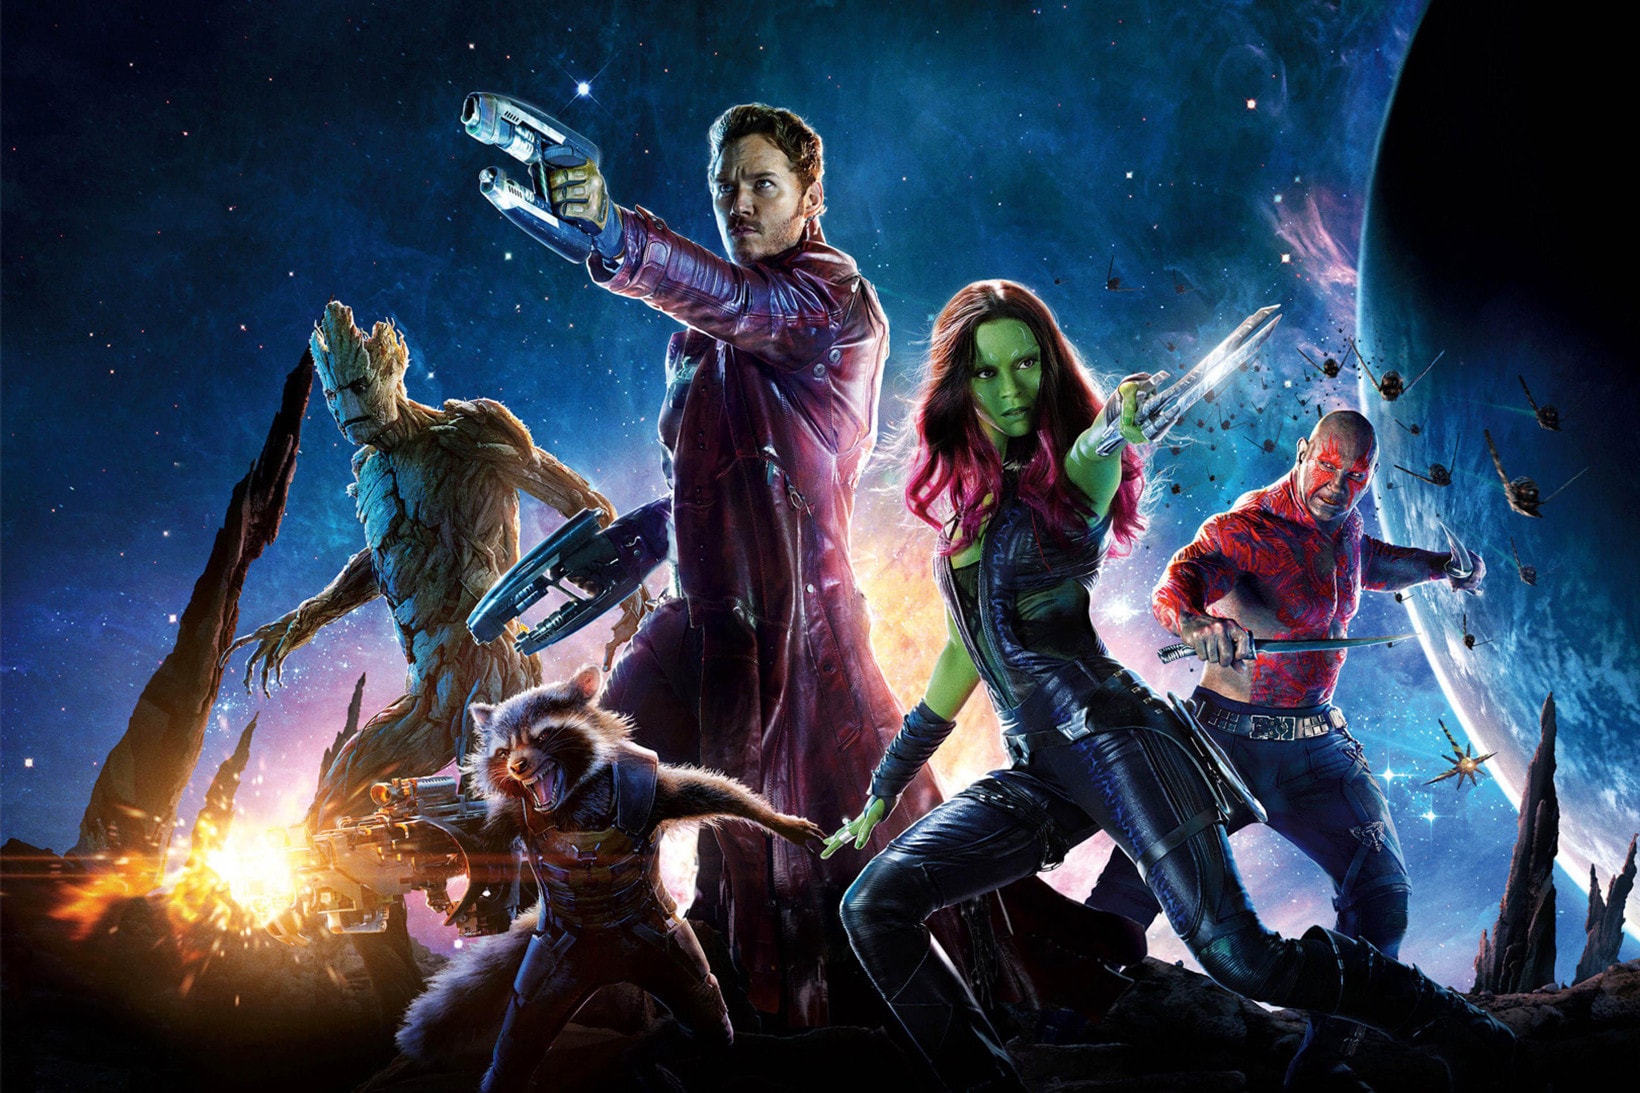 Marvel Studios Guardians of the Galaxy 3 Begins Filming 2020 Avengers Endgame Asgardians of the Galaxy